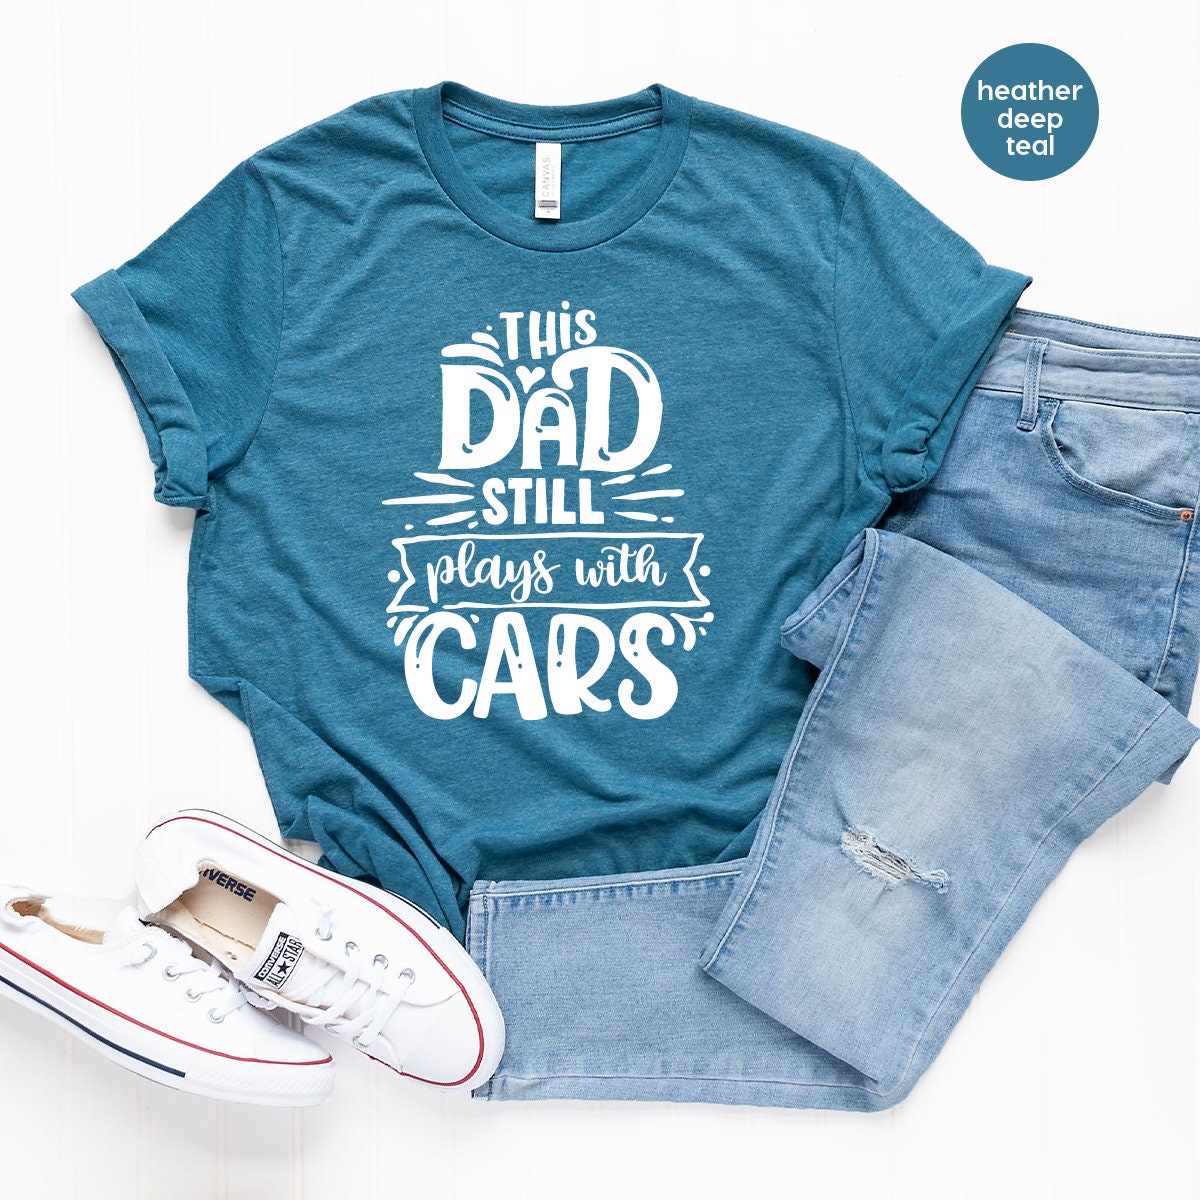 Funny Dad Shirt, Dad Shirts, This Dad Still Plays With Cars Shirt, Daddy T Shirt, Best Dad Evet Shirt, Car Lover Dad Gift, Fatherhood Shirt - Fastdeliverytees.com